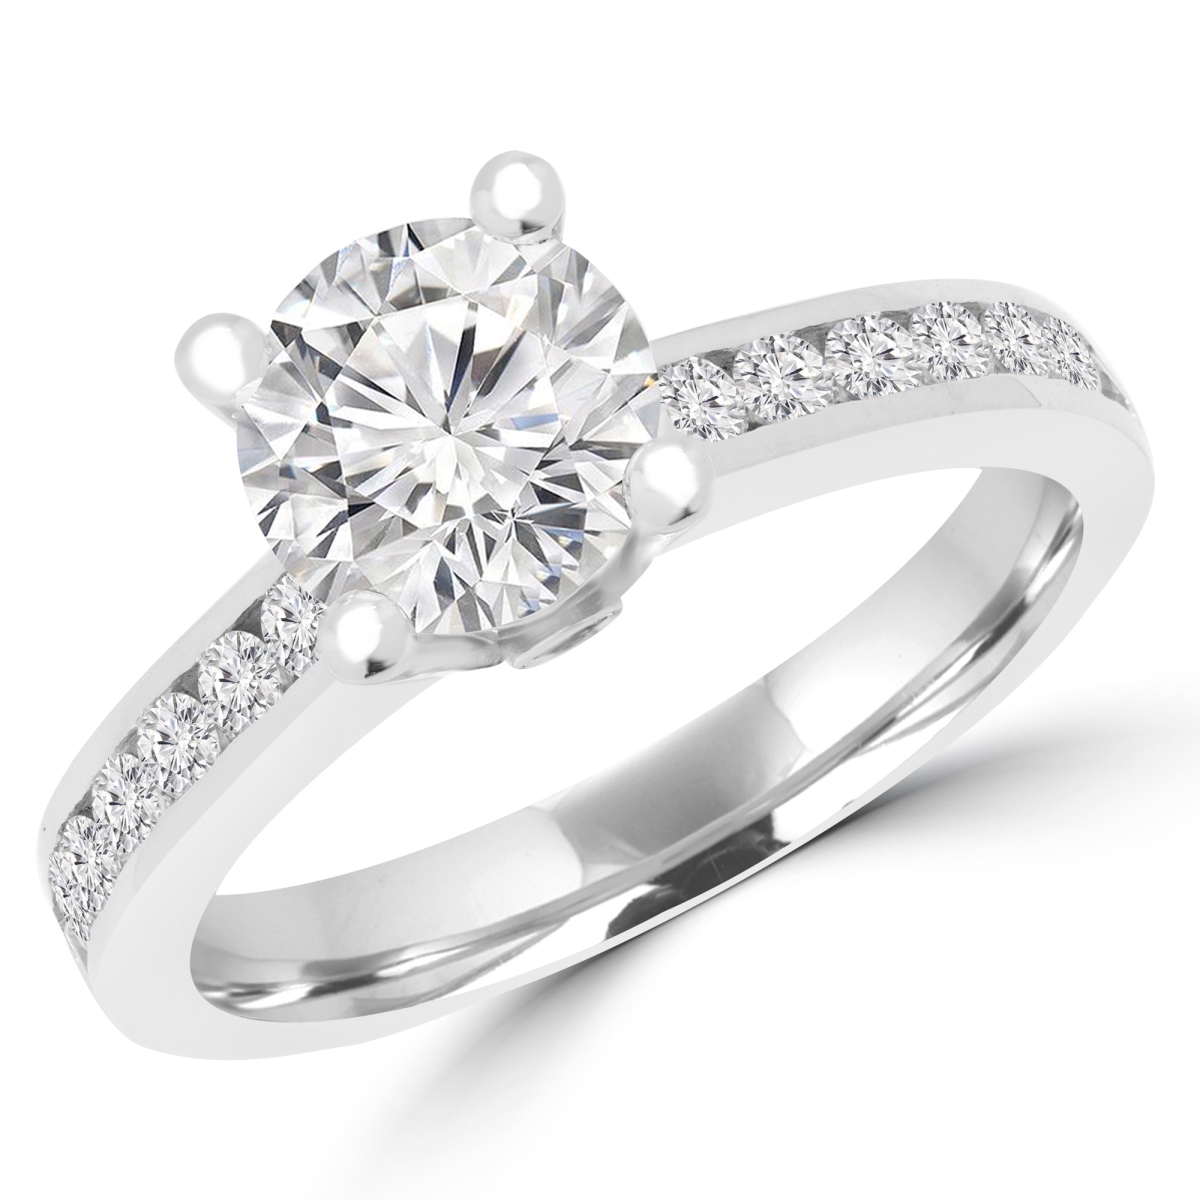 MD180535-5.25 1.1 CTW Round Diamond Solitaire with Accents Engagement Ring in 14K White Gold with Channel Set Accents - Size 5.25 -  Majesty Diamonds